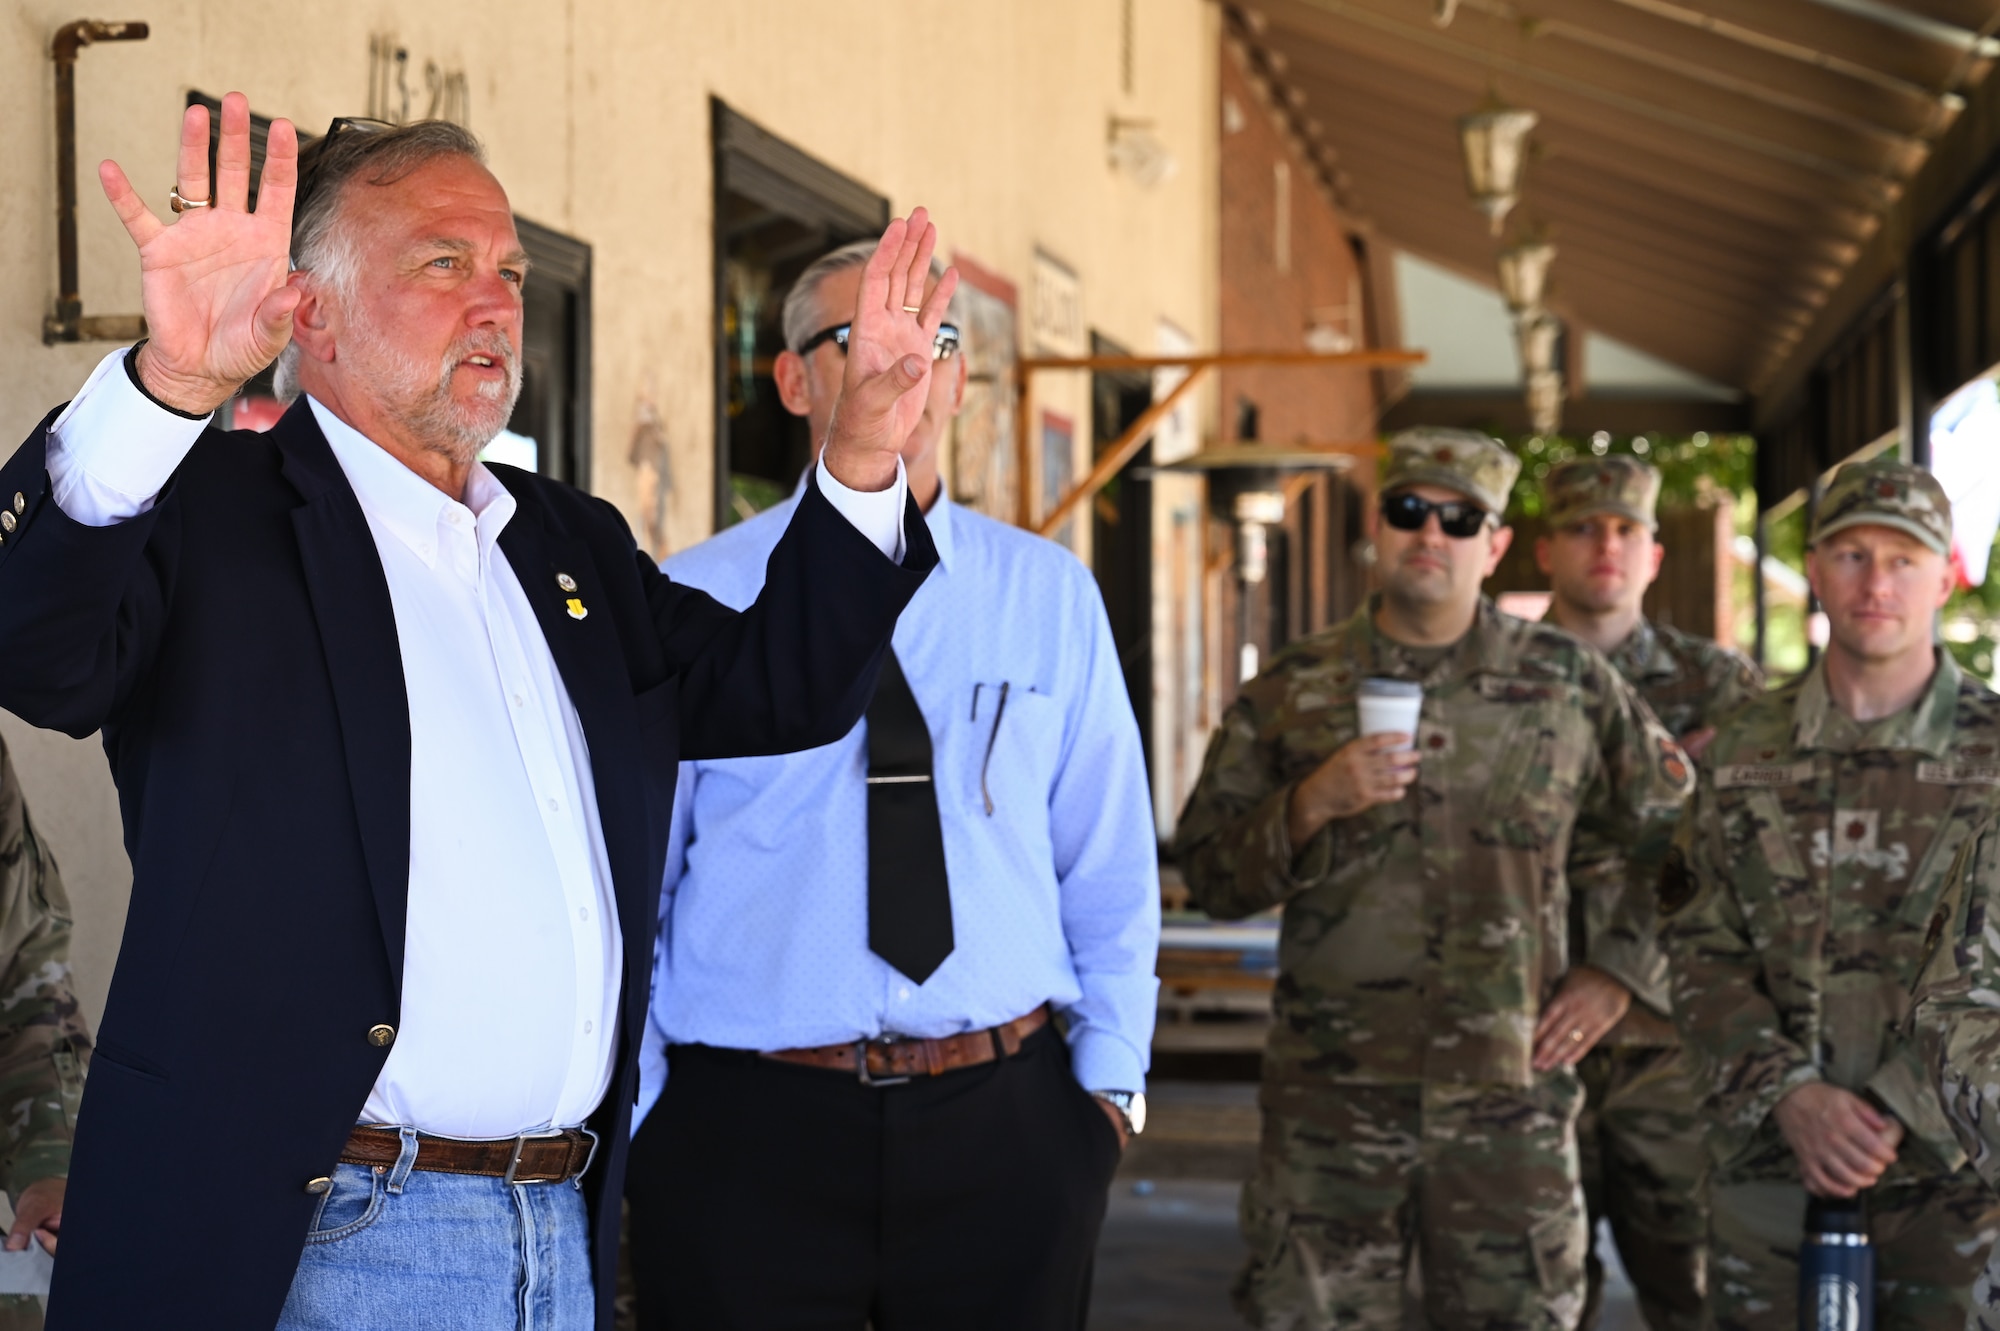 Walt Koenig, president and Chief Executive Officer of the San Angelo Chamber of Commerce, gives a tour of the downtown area to new 17th Training Wing senior leaders, San Angelo, Texas, July 26, 2022. San Angelo is the only community to be awarded the Altus Trophy three times, recognizing the Air Force community that provides the finest support to its Air Education and Training Command unit. (U.S. Air Force photo by Senior Airman Michael Bowman)